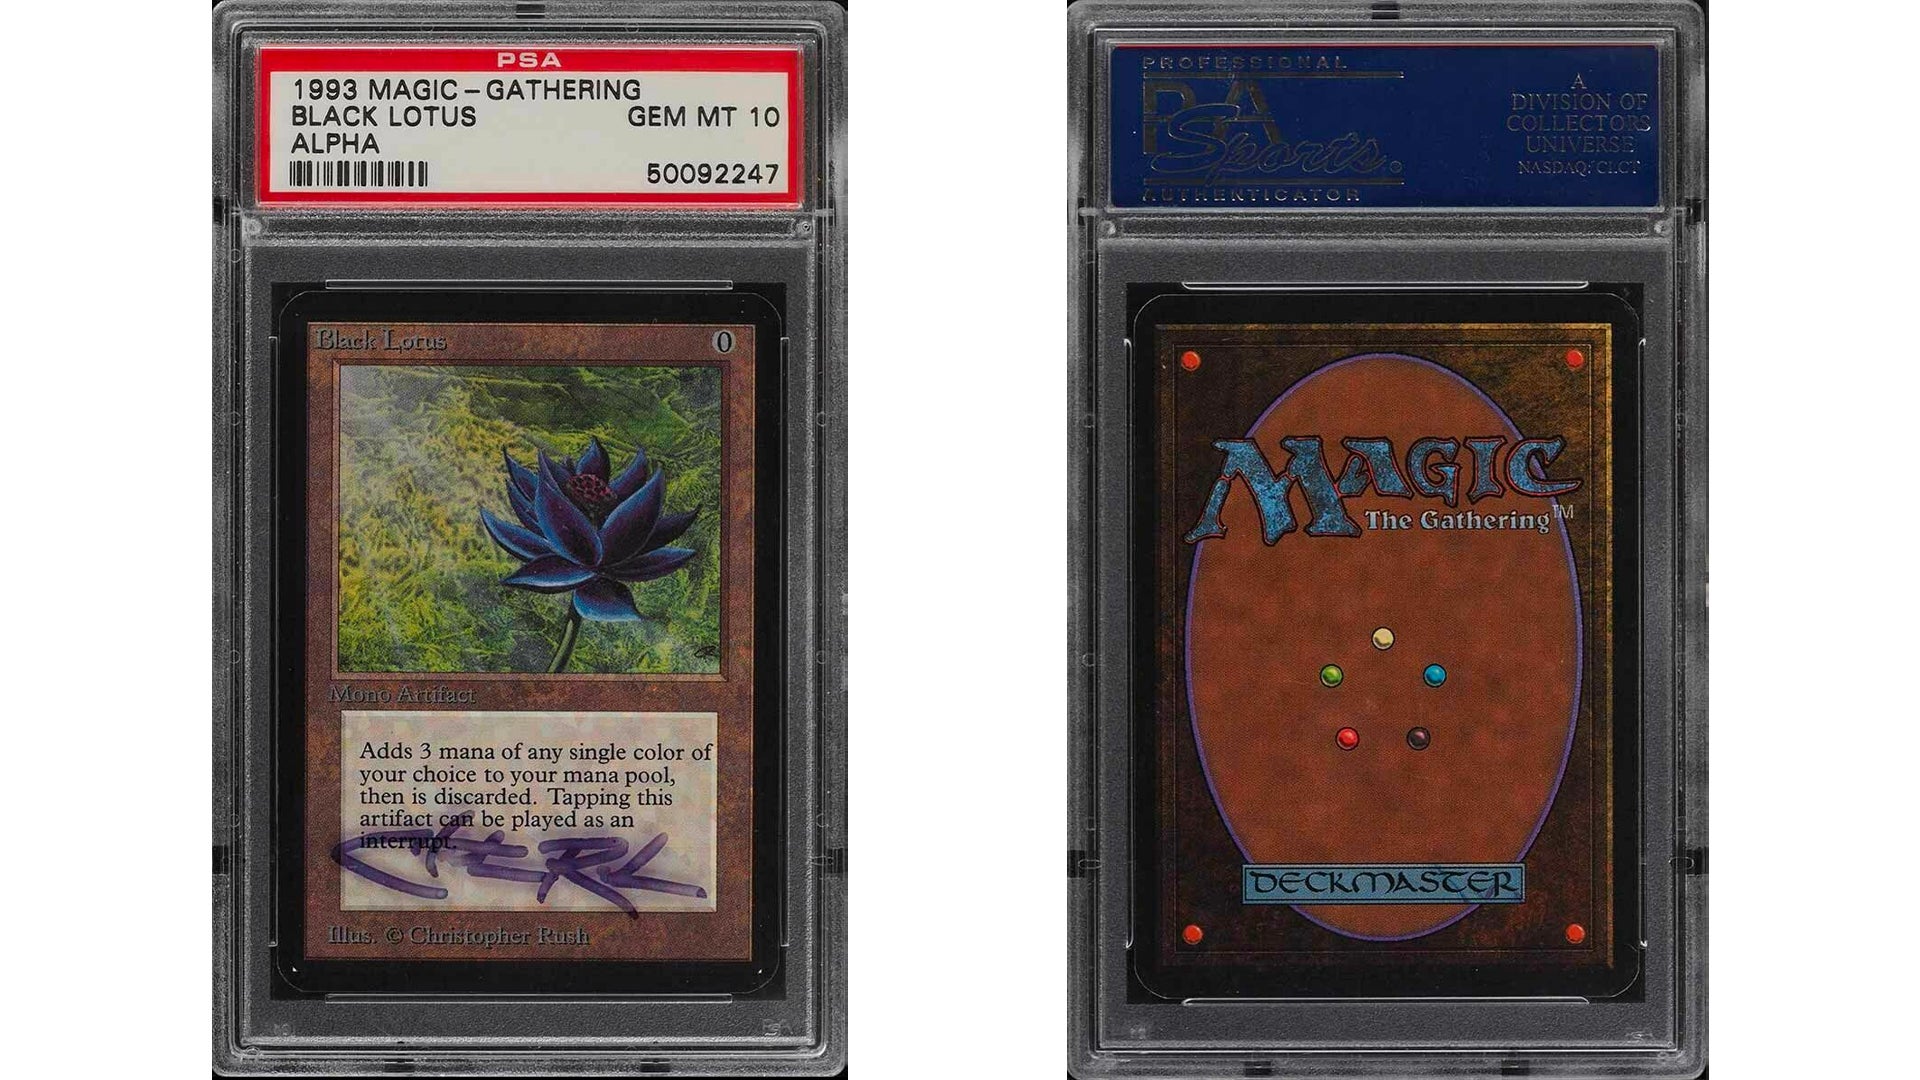 Autographed Black Lotus looks set to become Magic: The Gathering's 